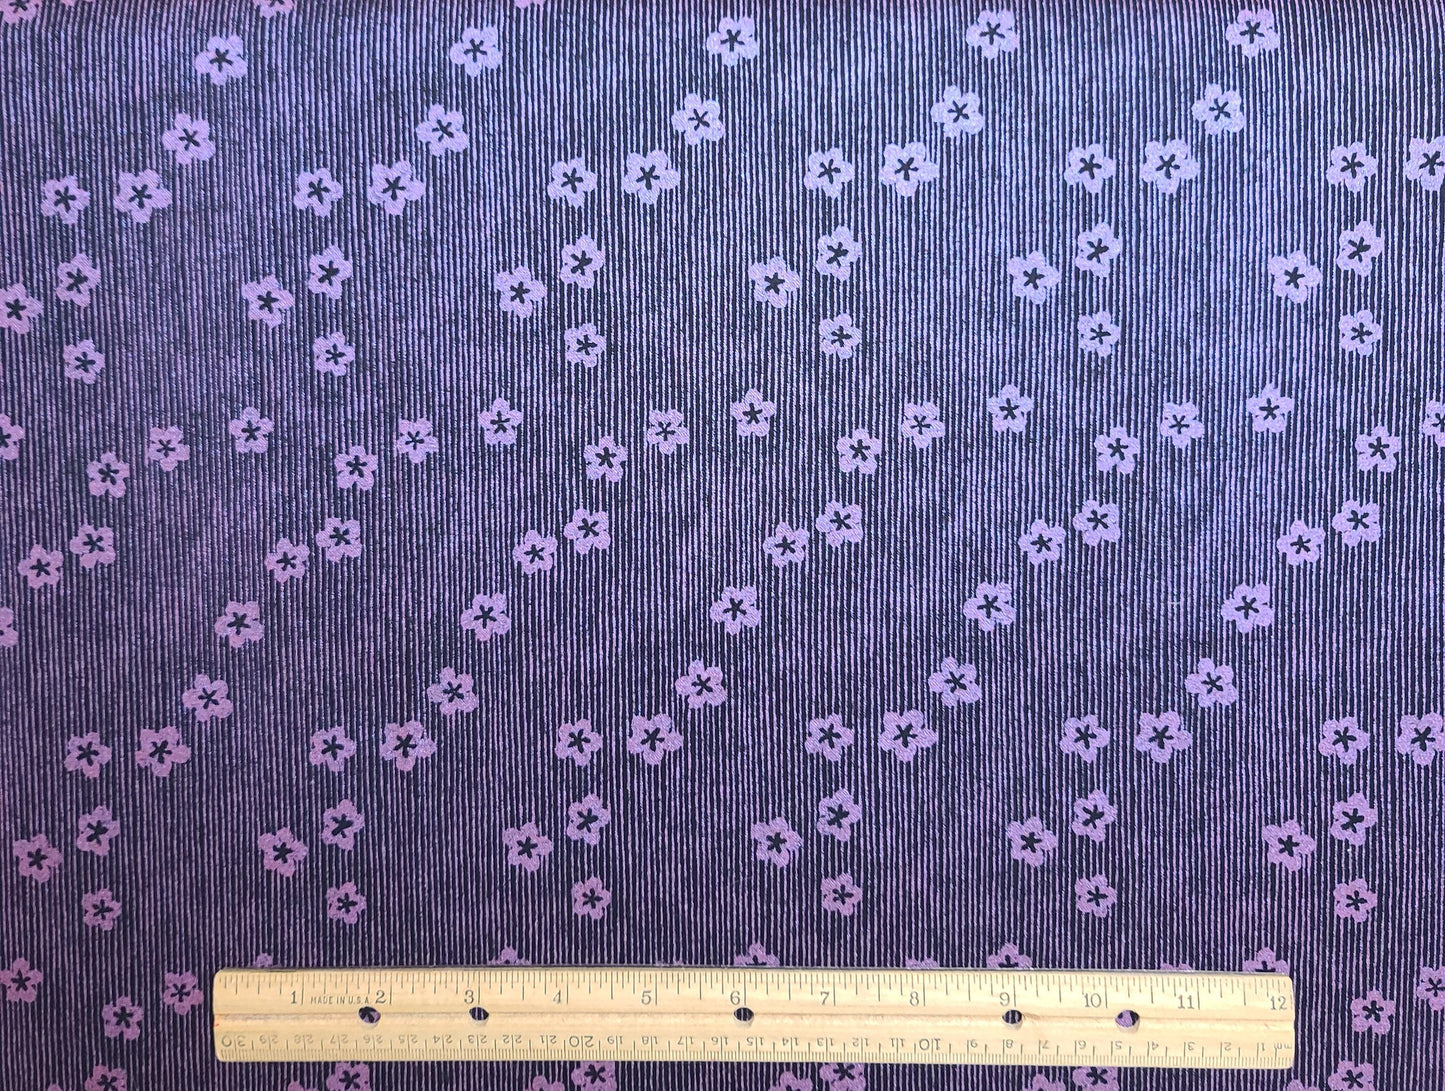 Special Effects by Paula Gutcheon for Clothworks - Black Fabric / Lavender Foil Flower and Vertical Stripe (Parallel to Selvage) Fabric